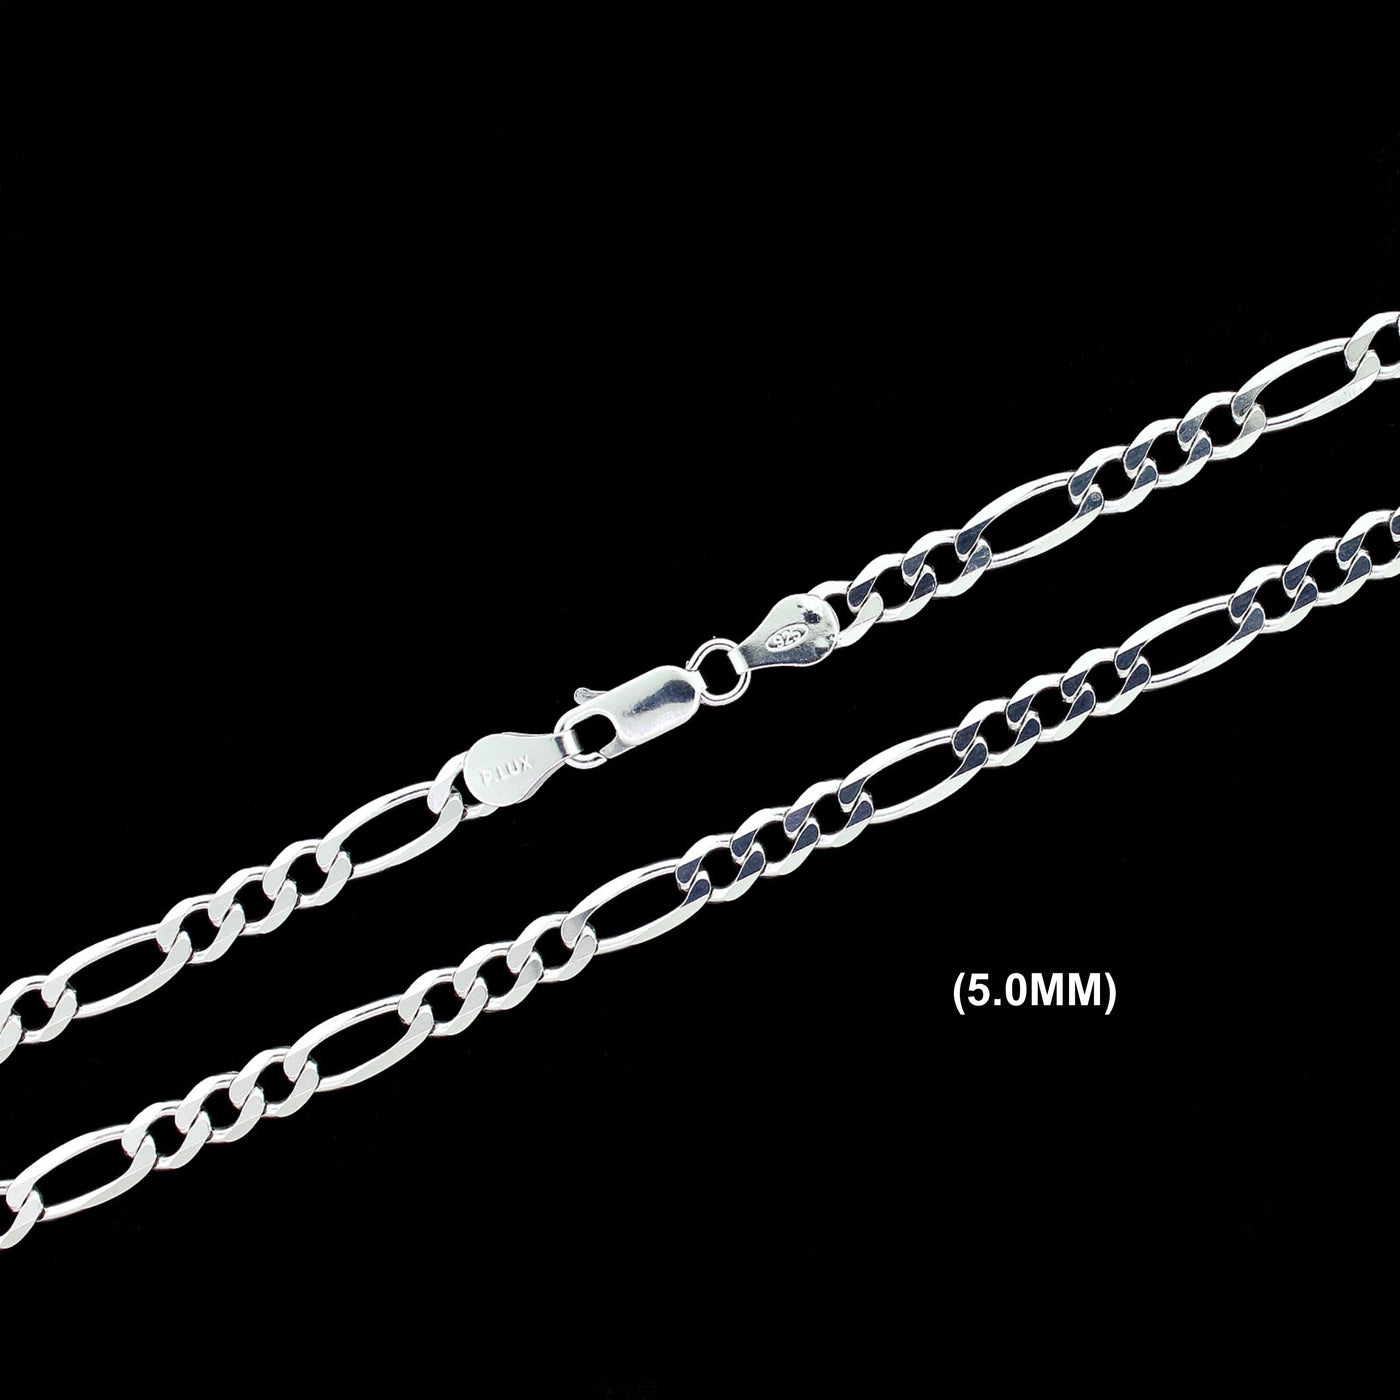 Real Solid 925 Sterling Silver Figaro Link Chain Necklace Bracelet 2.5mm 3mm 4mm 5mm 6mm 7mm 8mm 9mm Gift For Men & Women ITALY